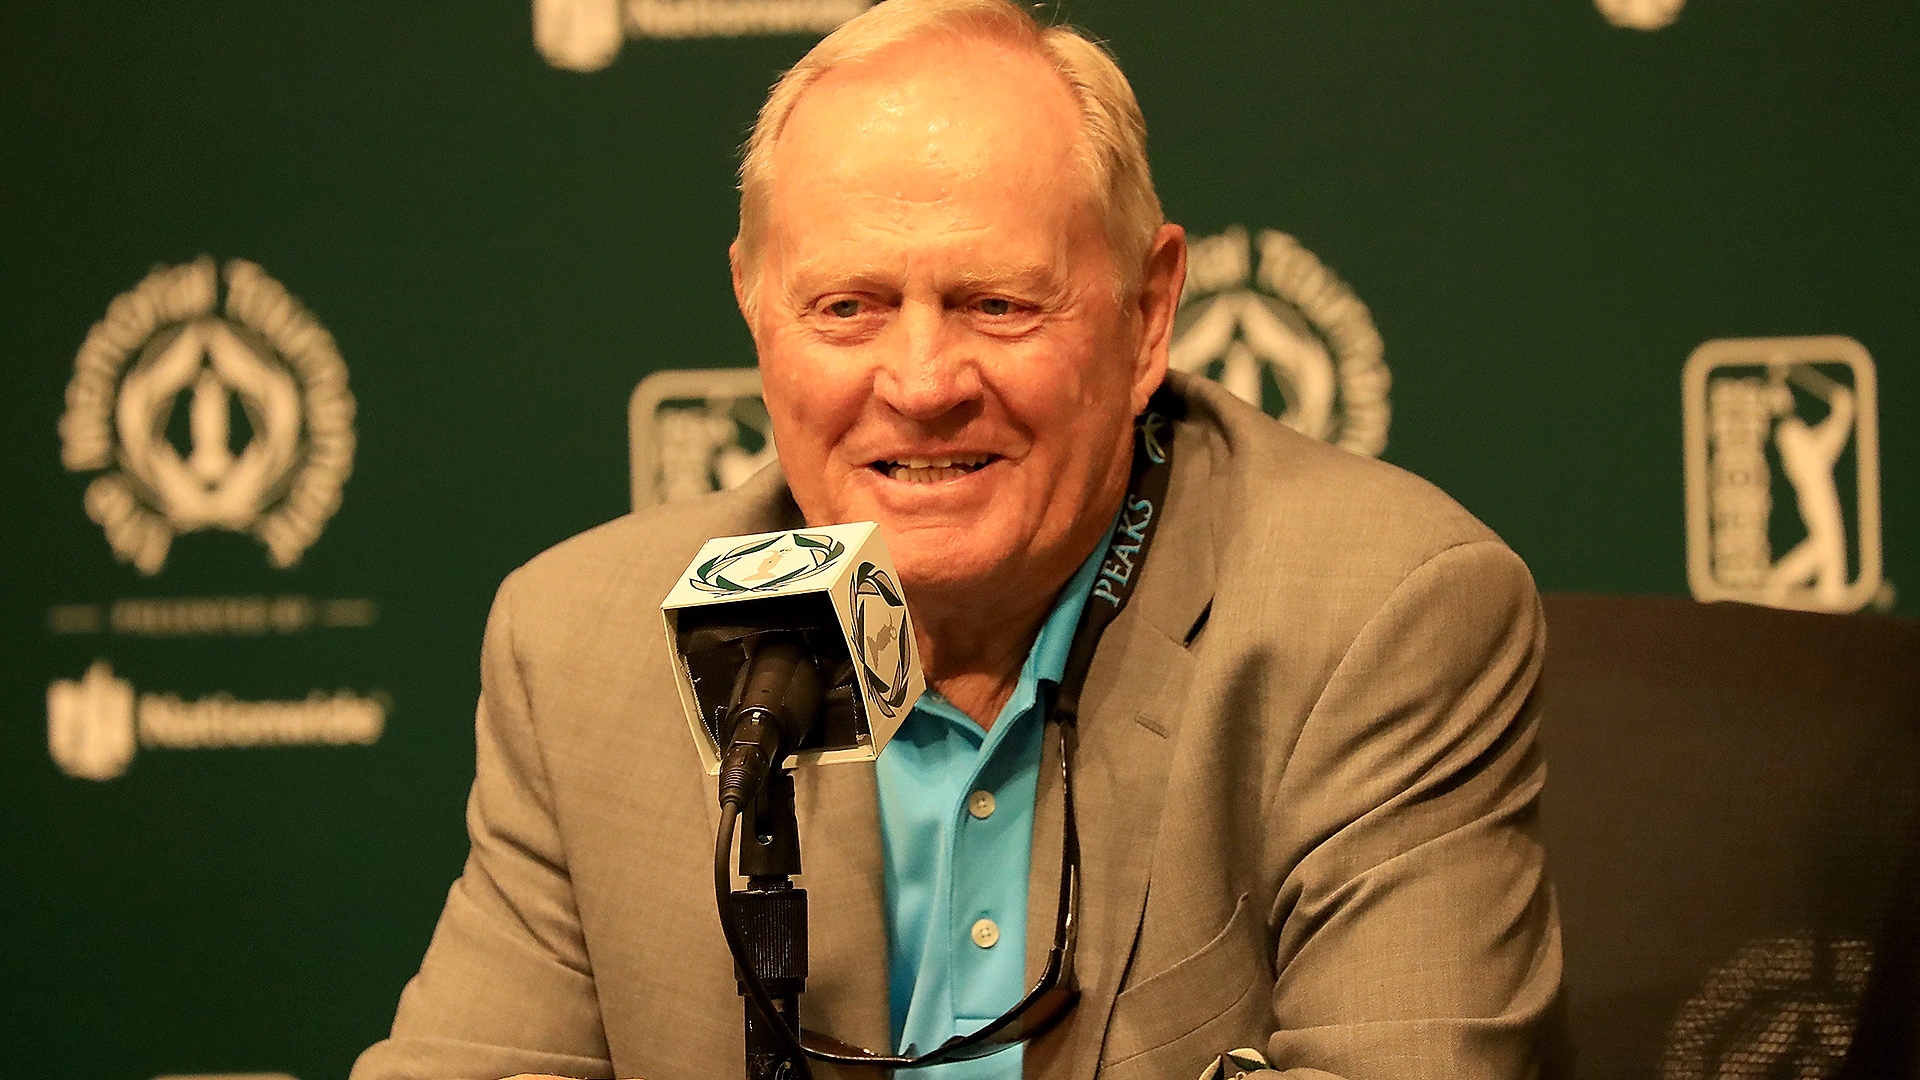 Nicklaus praises HS golfer for reporting penalty